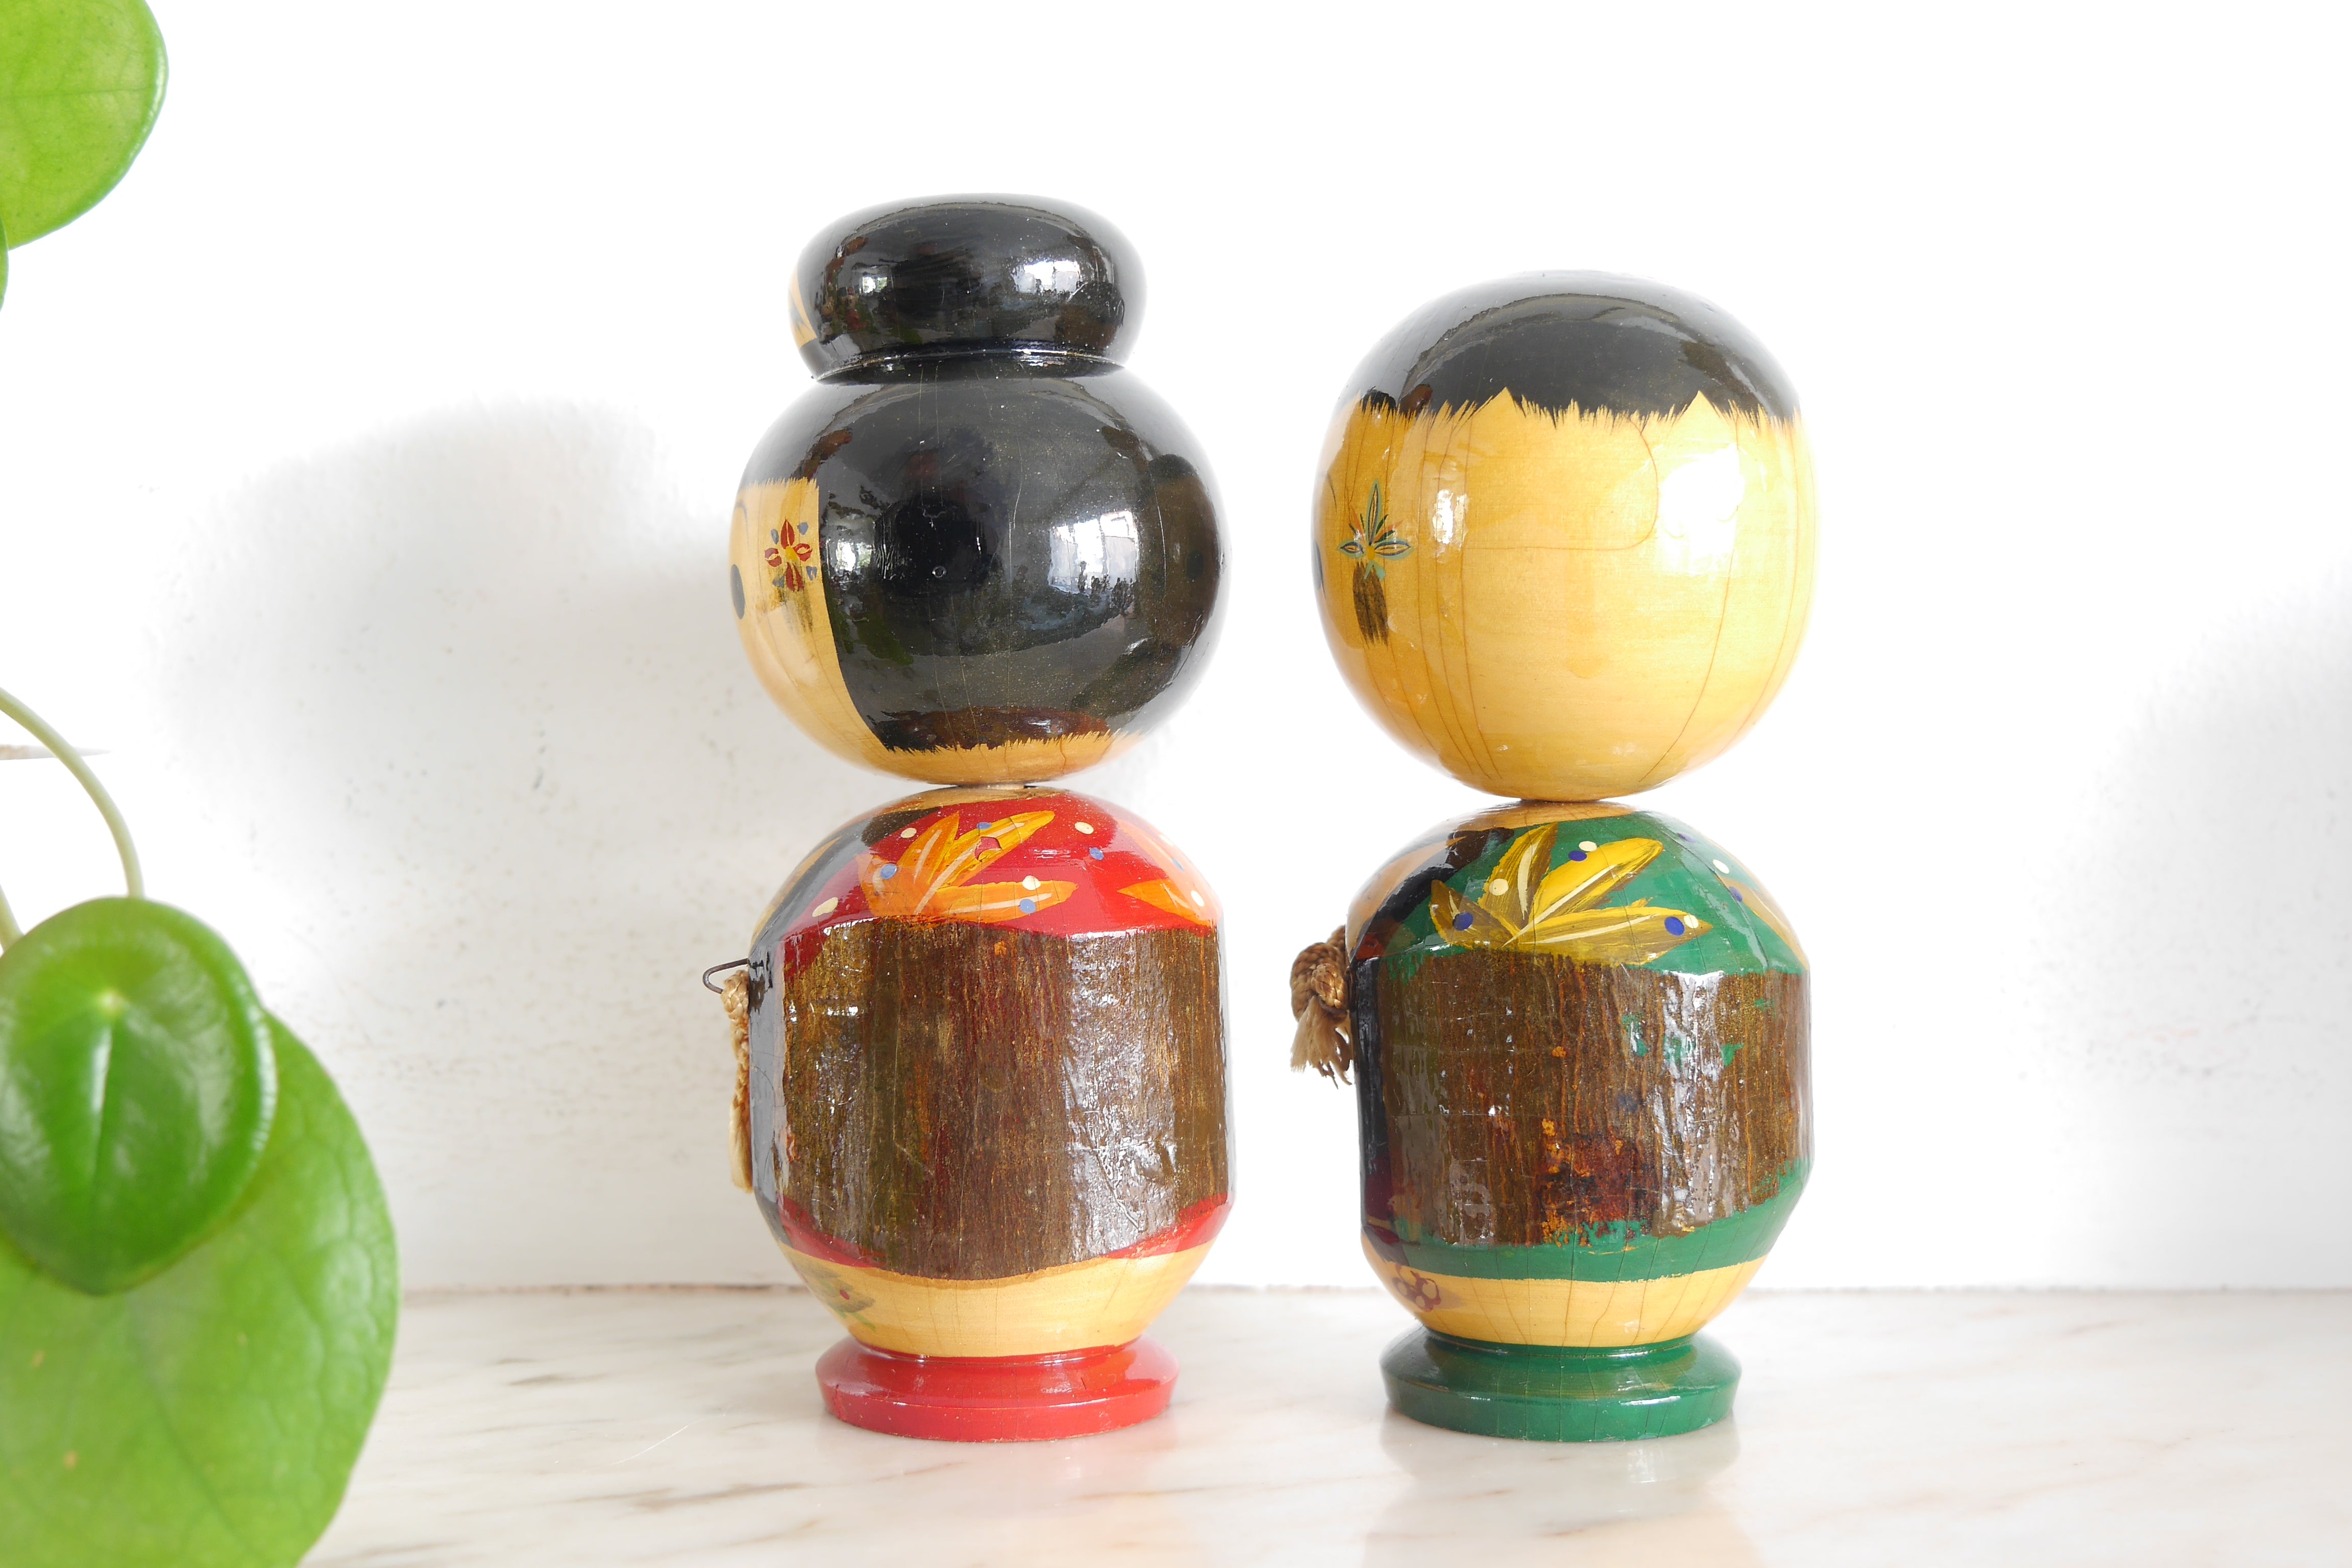 A lovely Colorful pair of Vintage Creative Kokeshi